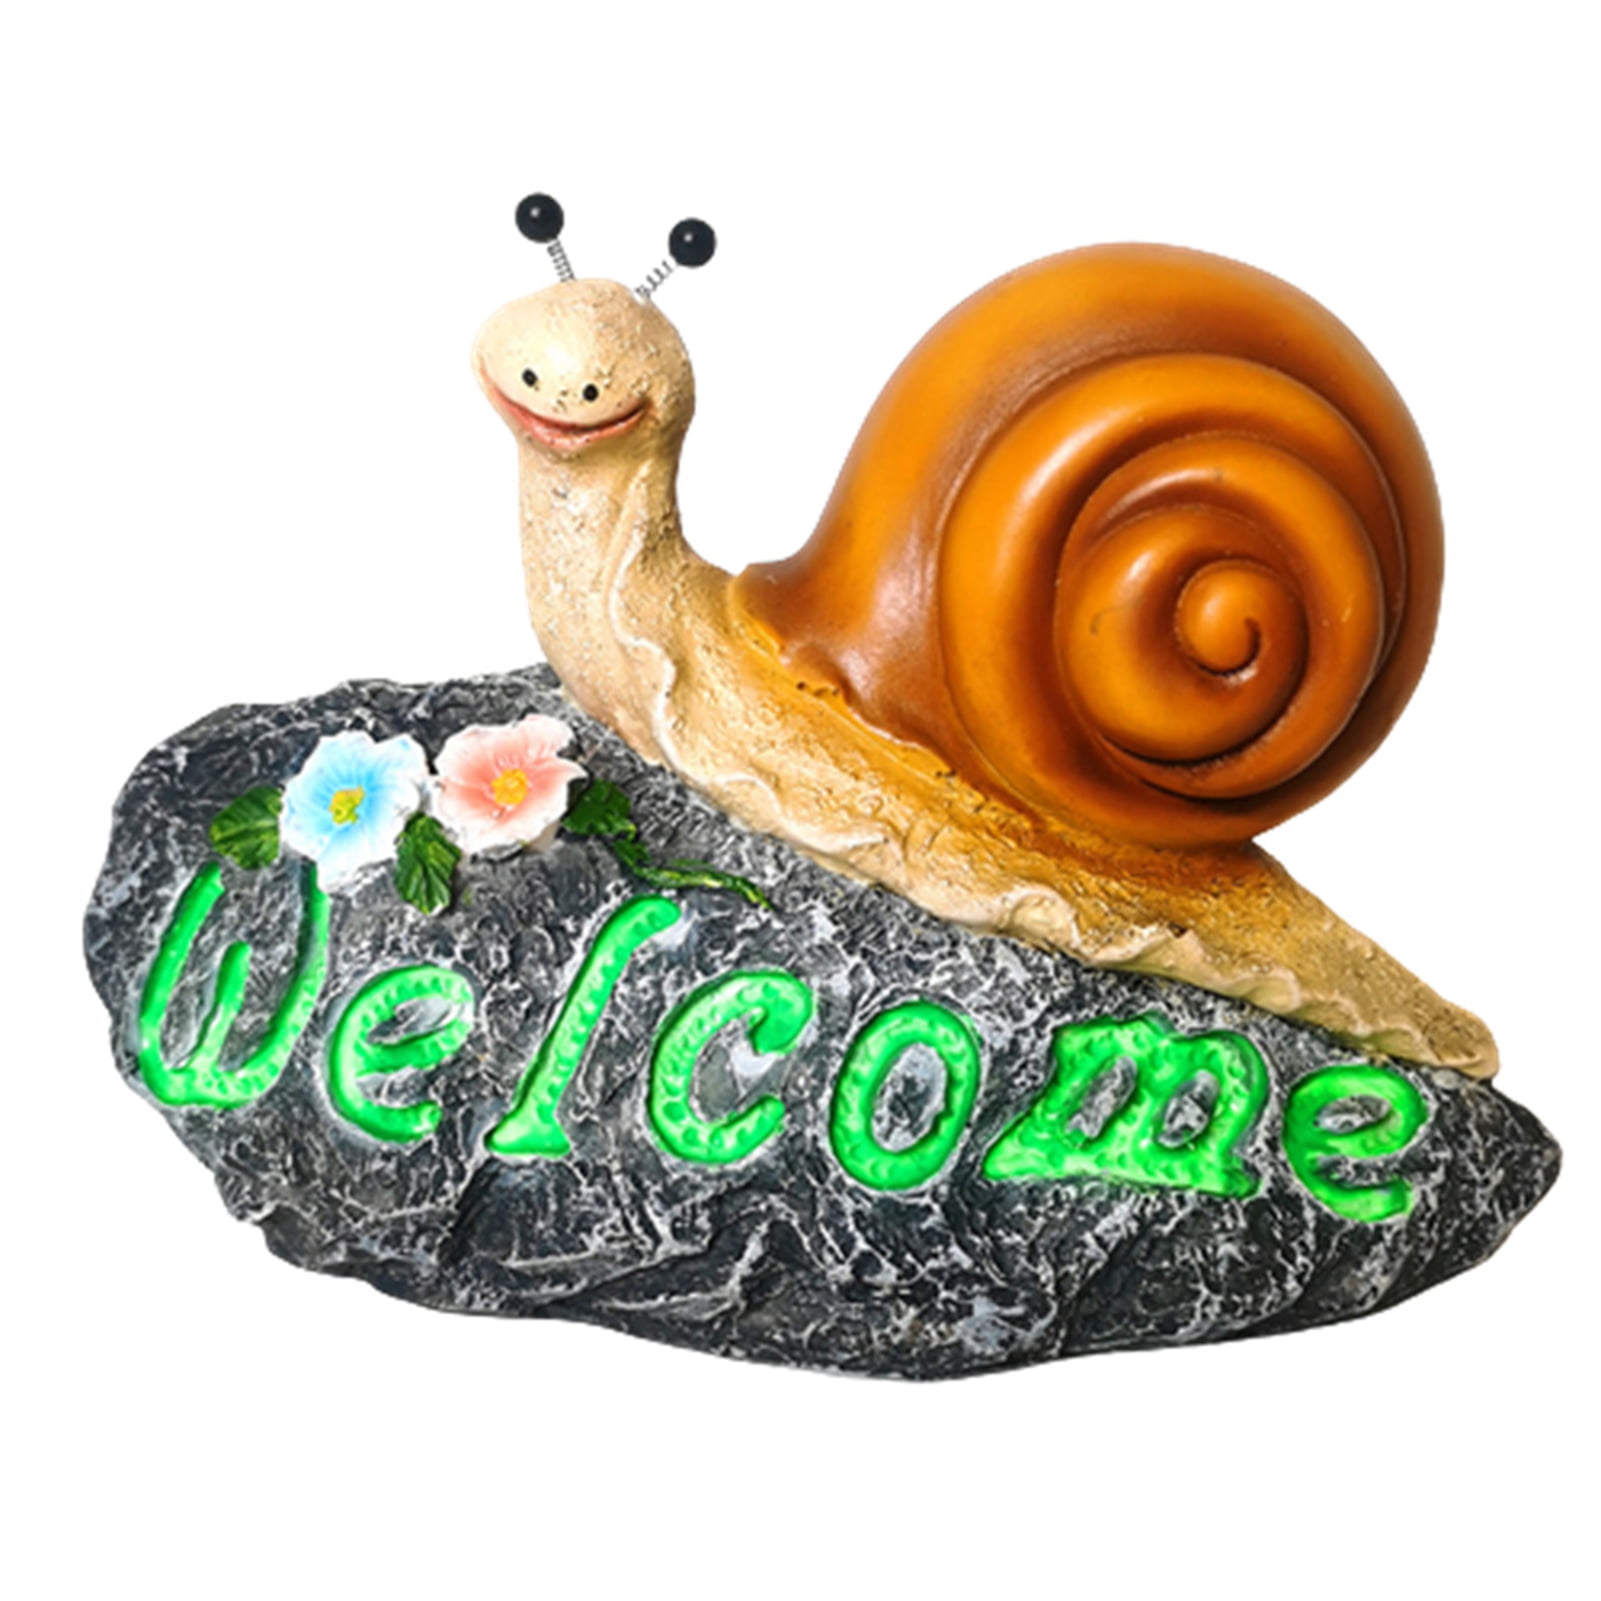 Garden decoration small ornament simulation animal model toy artificial snail 